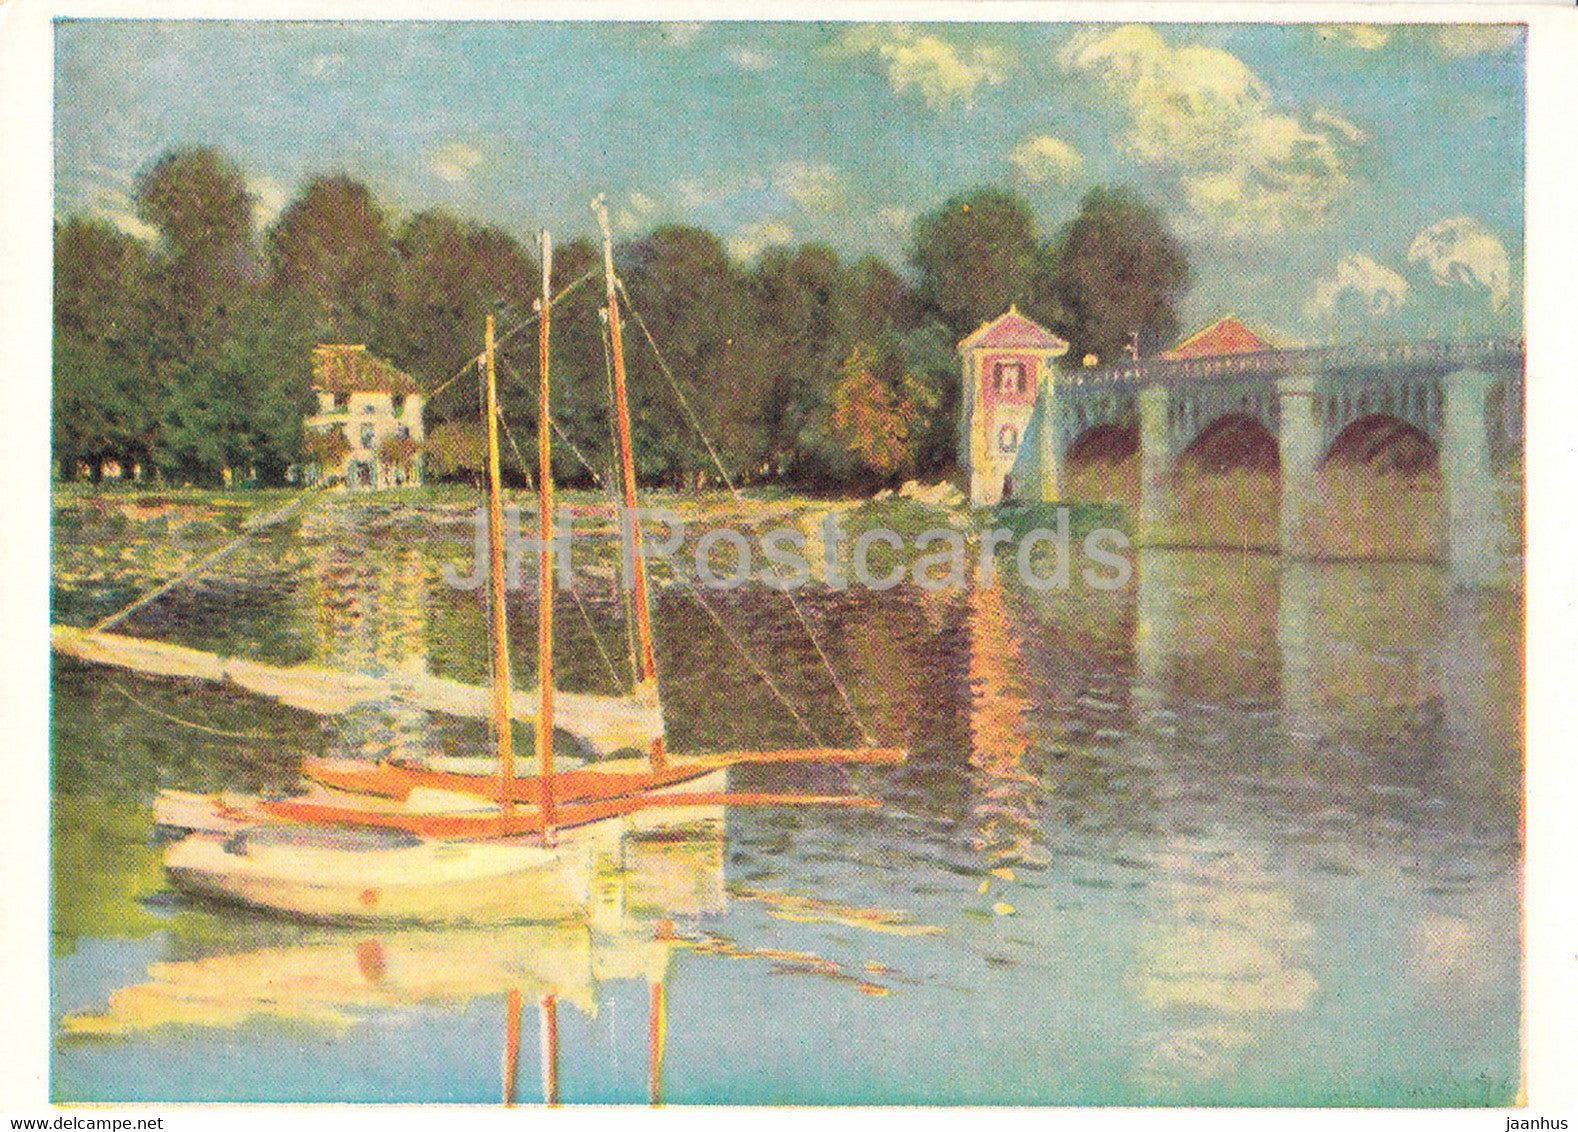 painting by Claude Monet - Railway Bridge at Argenteuil - sailing boat - French art - England - unused - JH Postcards